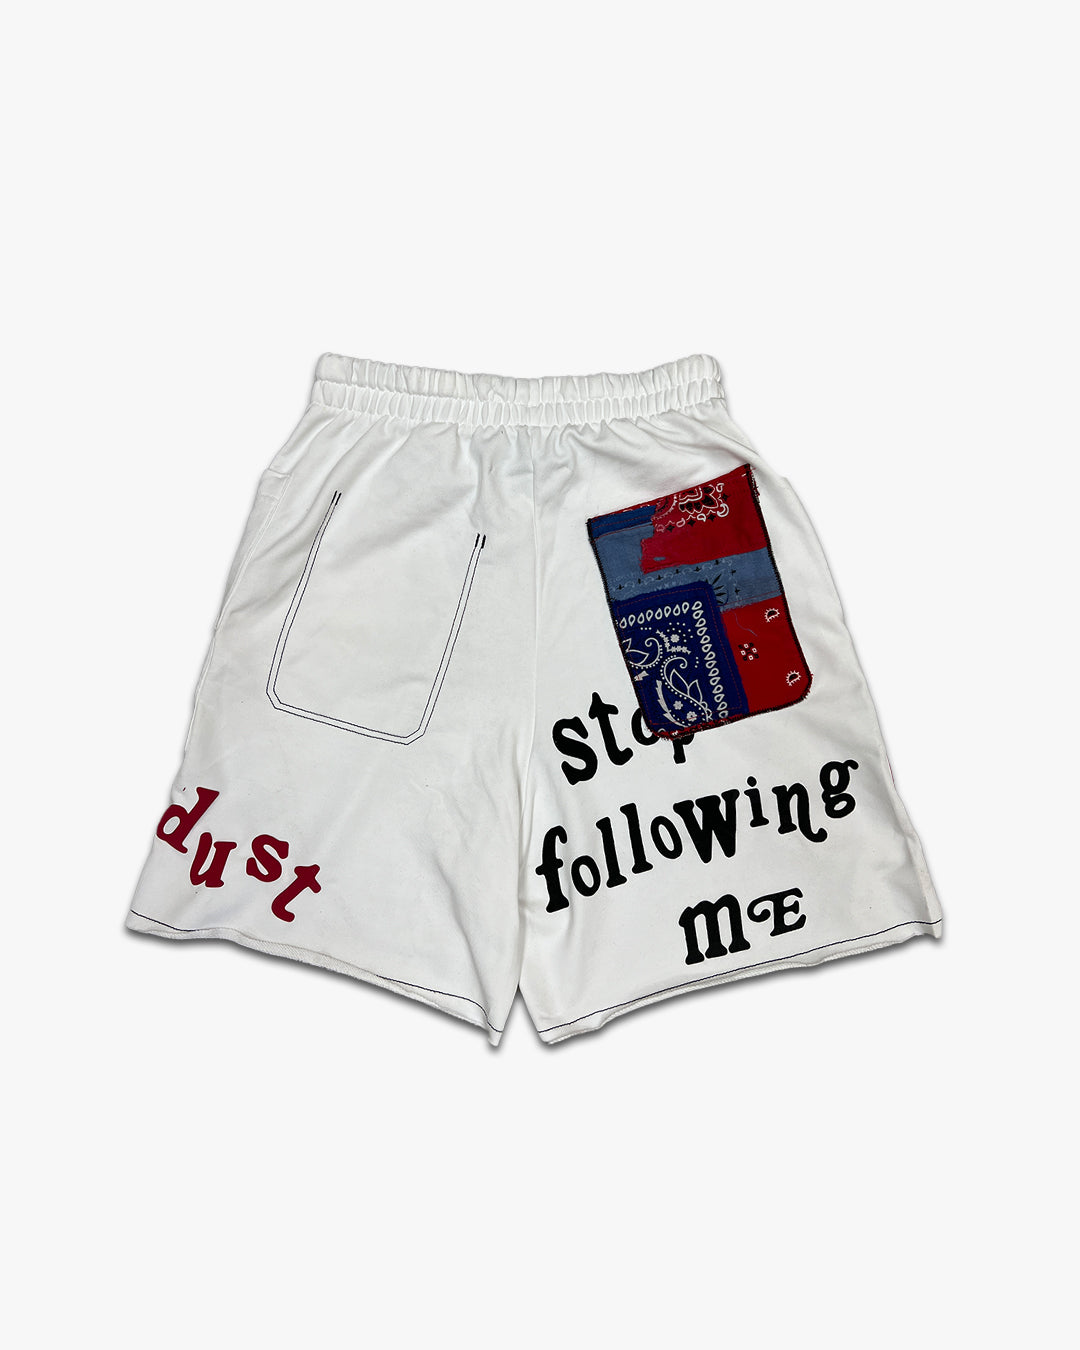 Dusted Festival Shorts